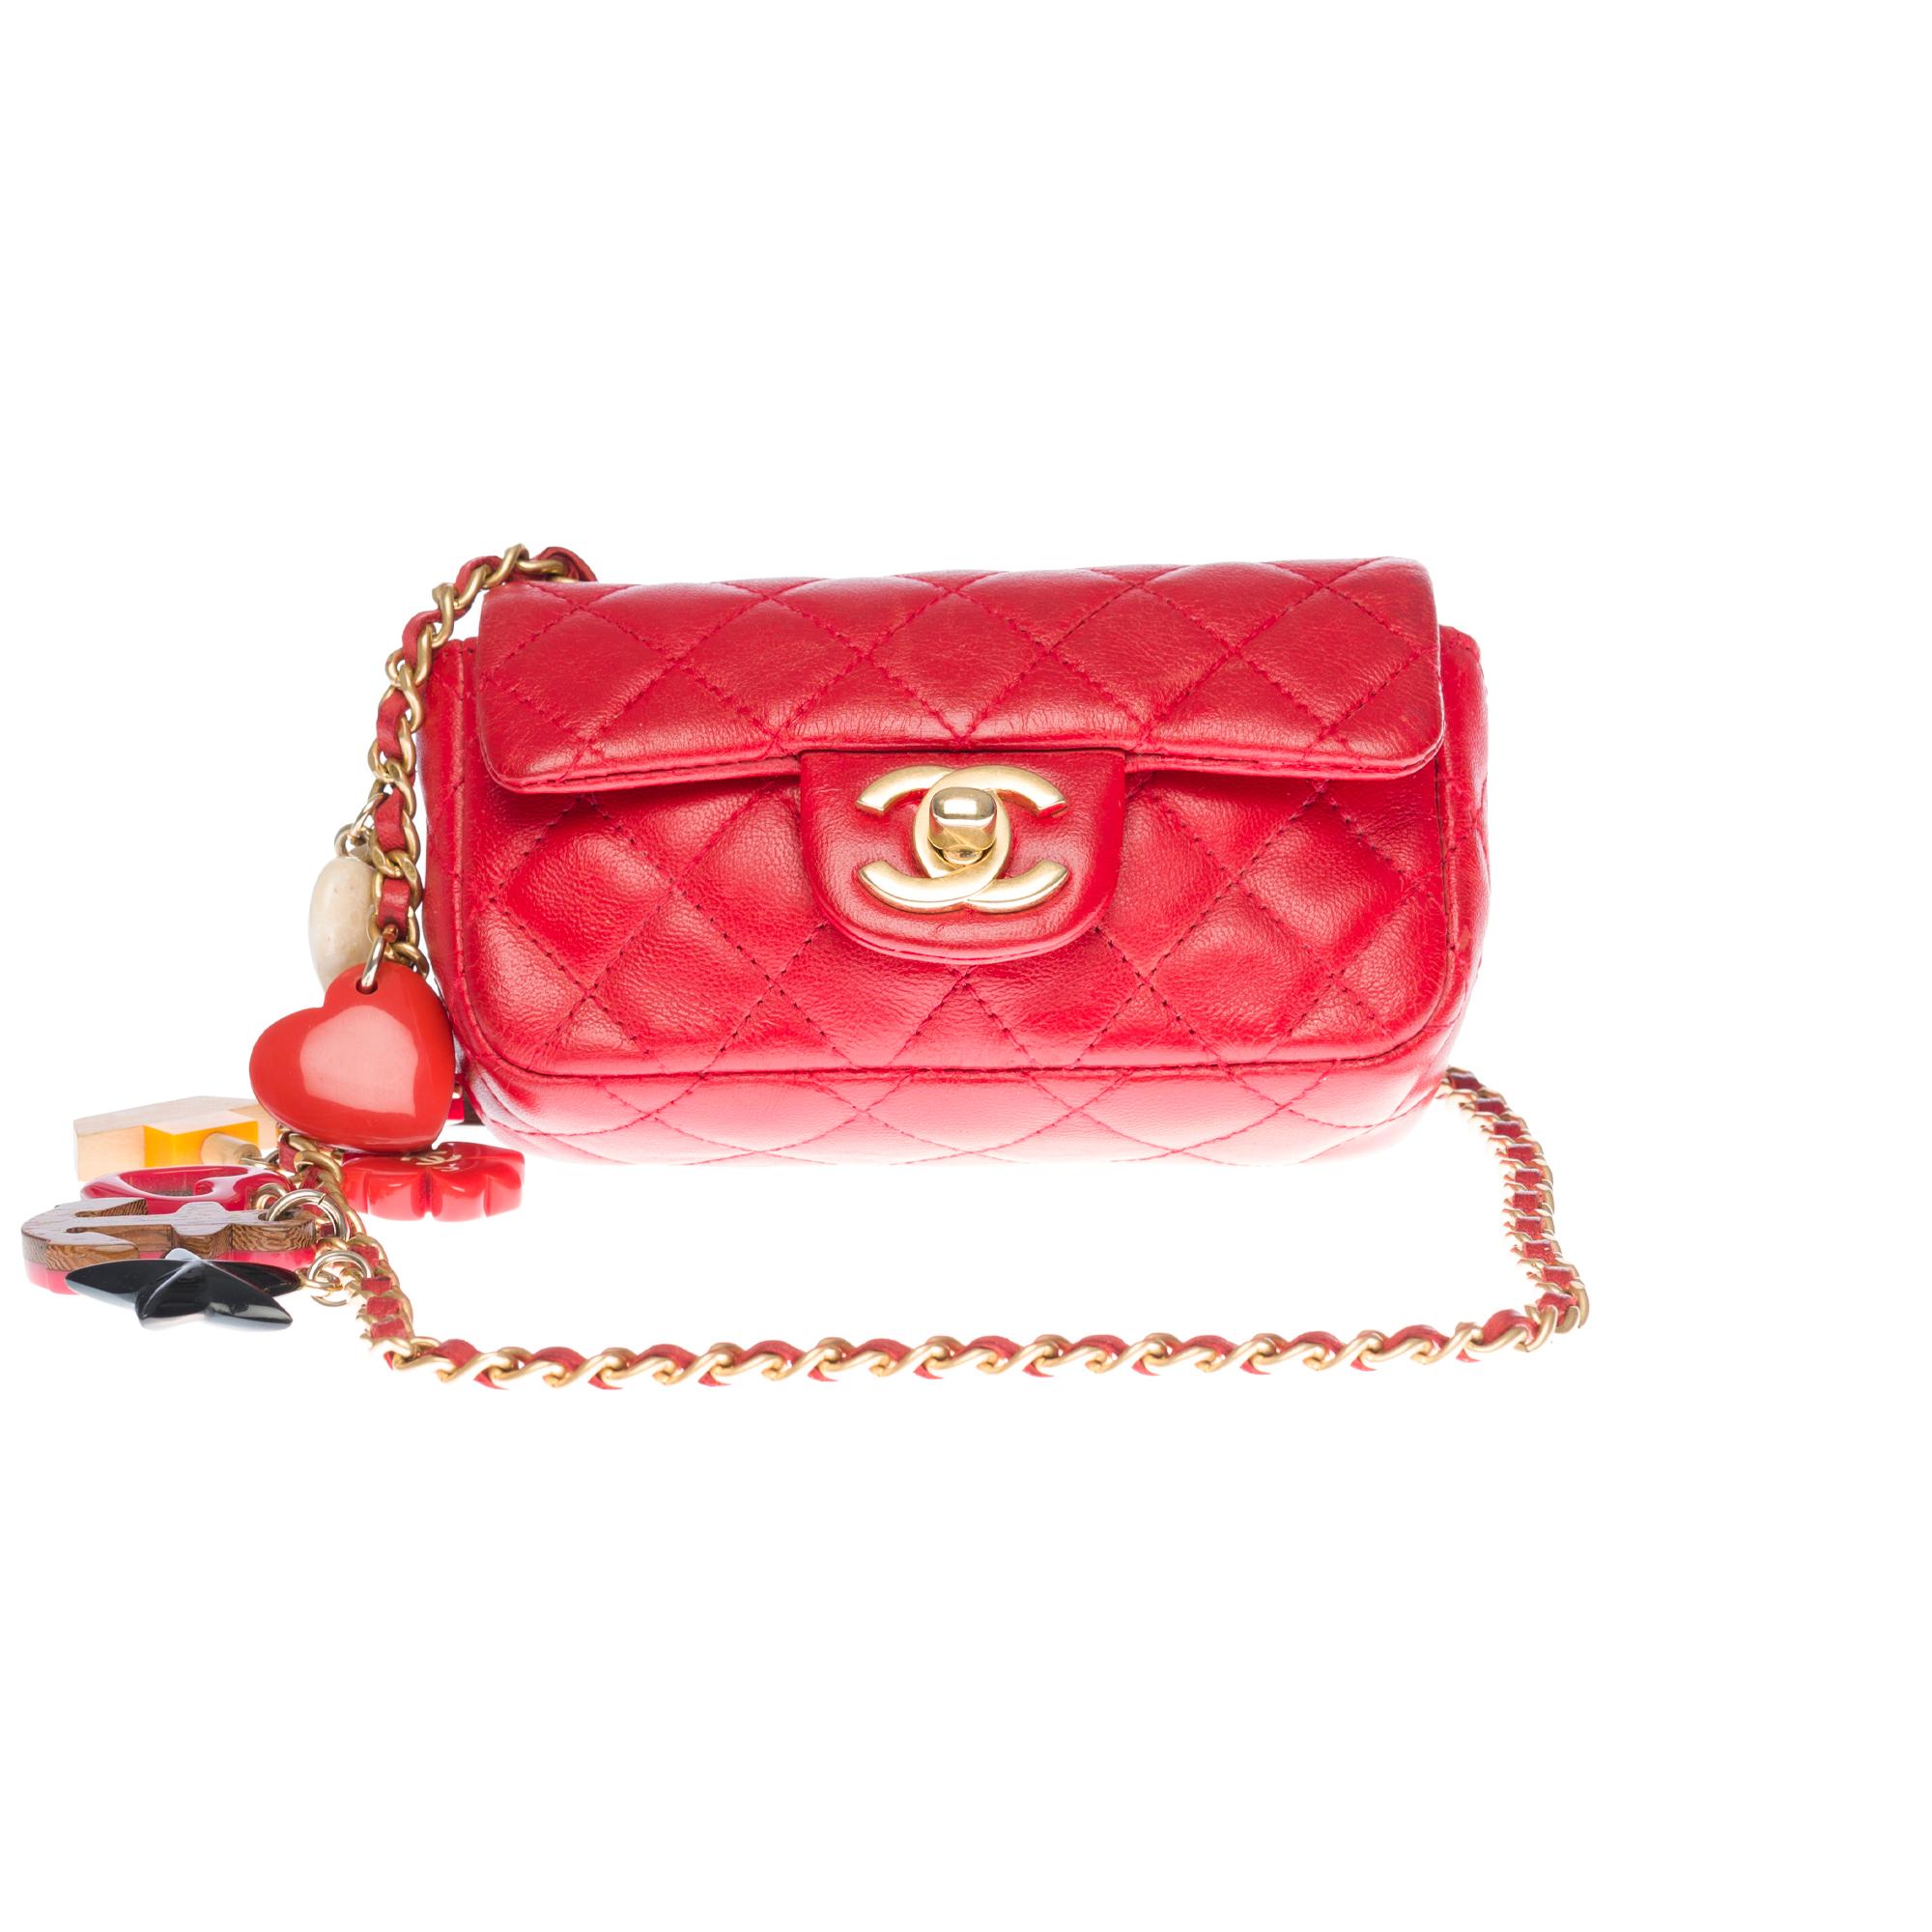 Chanel Mini Charms Shoulder bag in Red quilted leather and Gold hardware